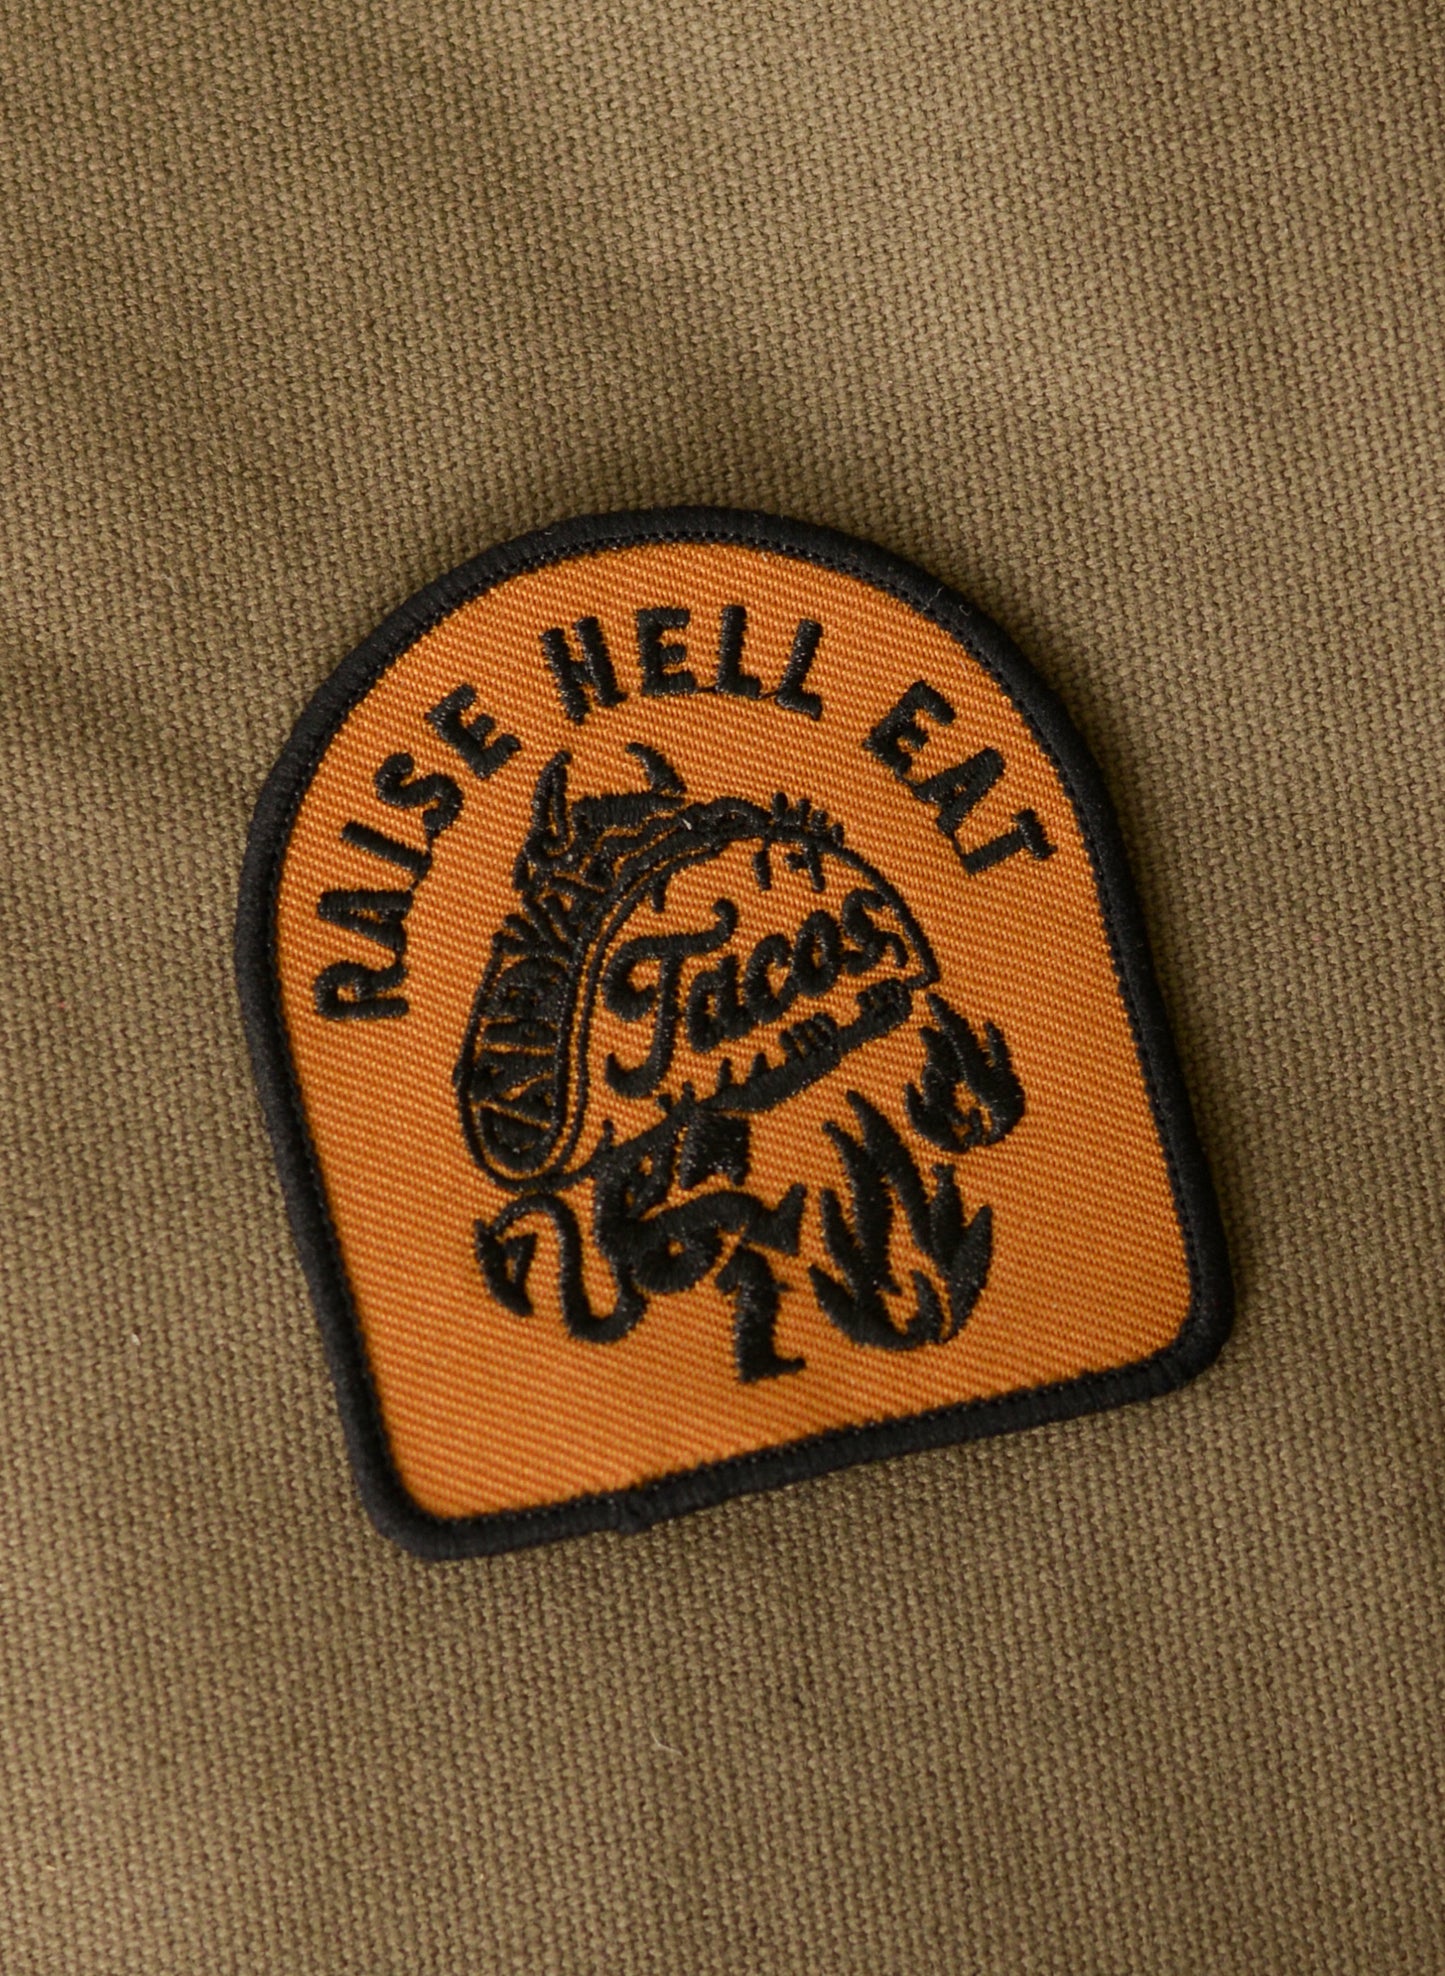 Raise Hell Eat Tacos Men's Taco Tuesday Devil Foodie Iron On Patch Foodie Gift Austin ATX